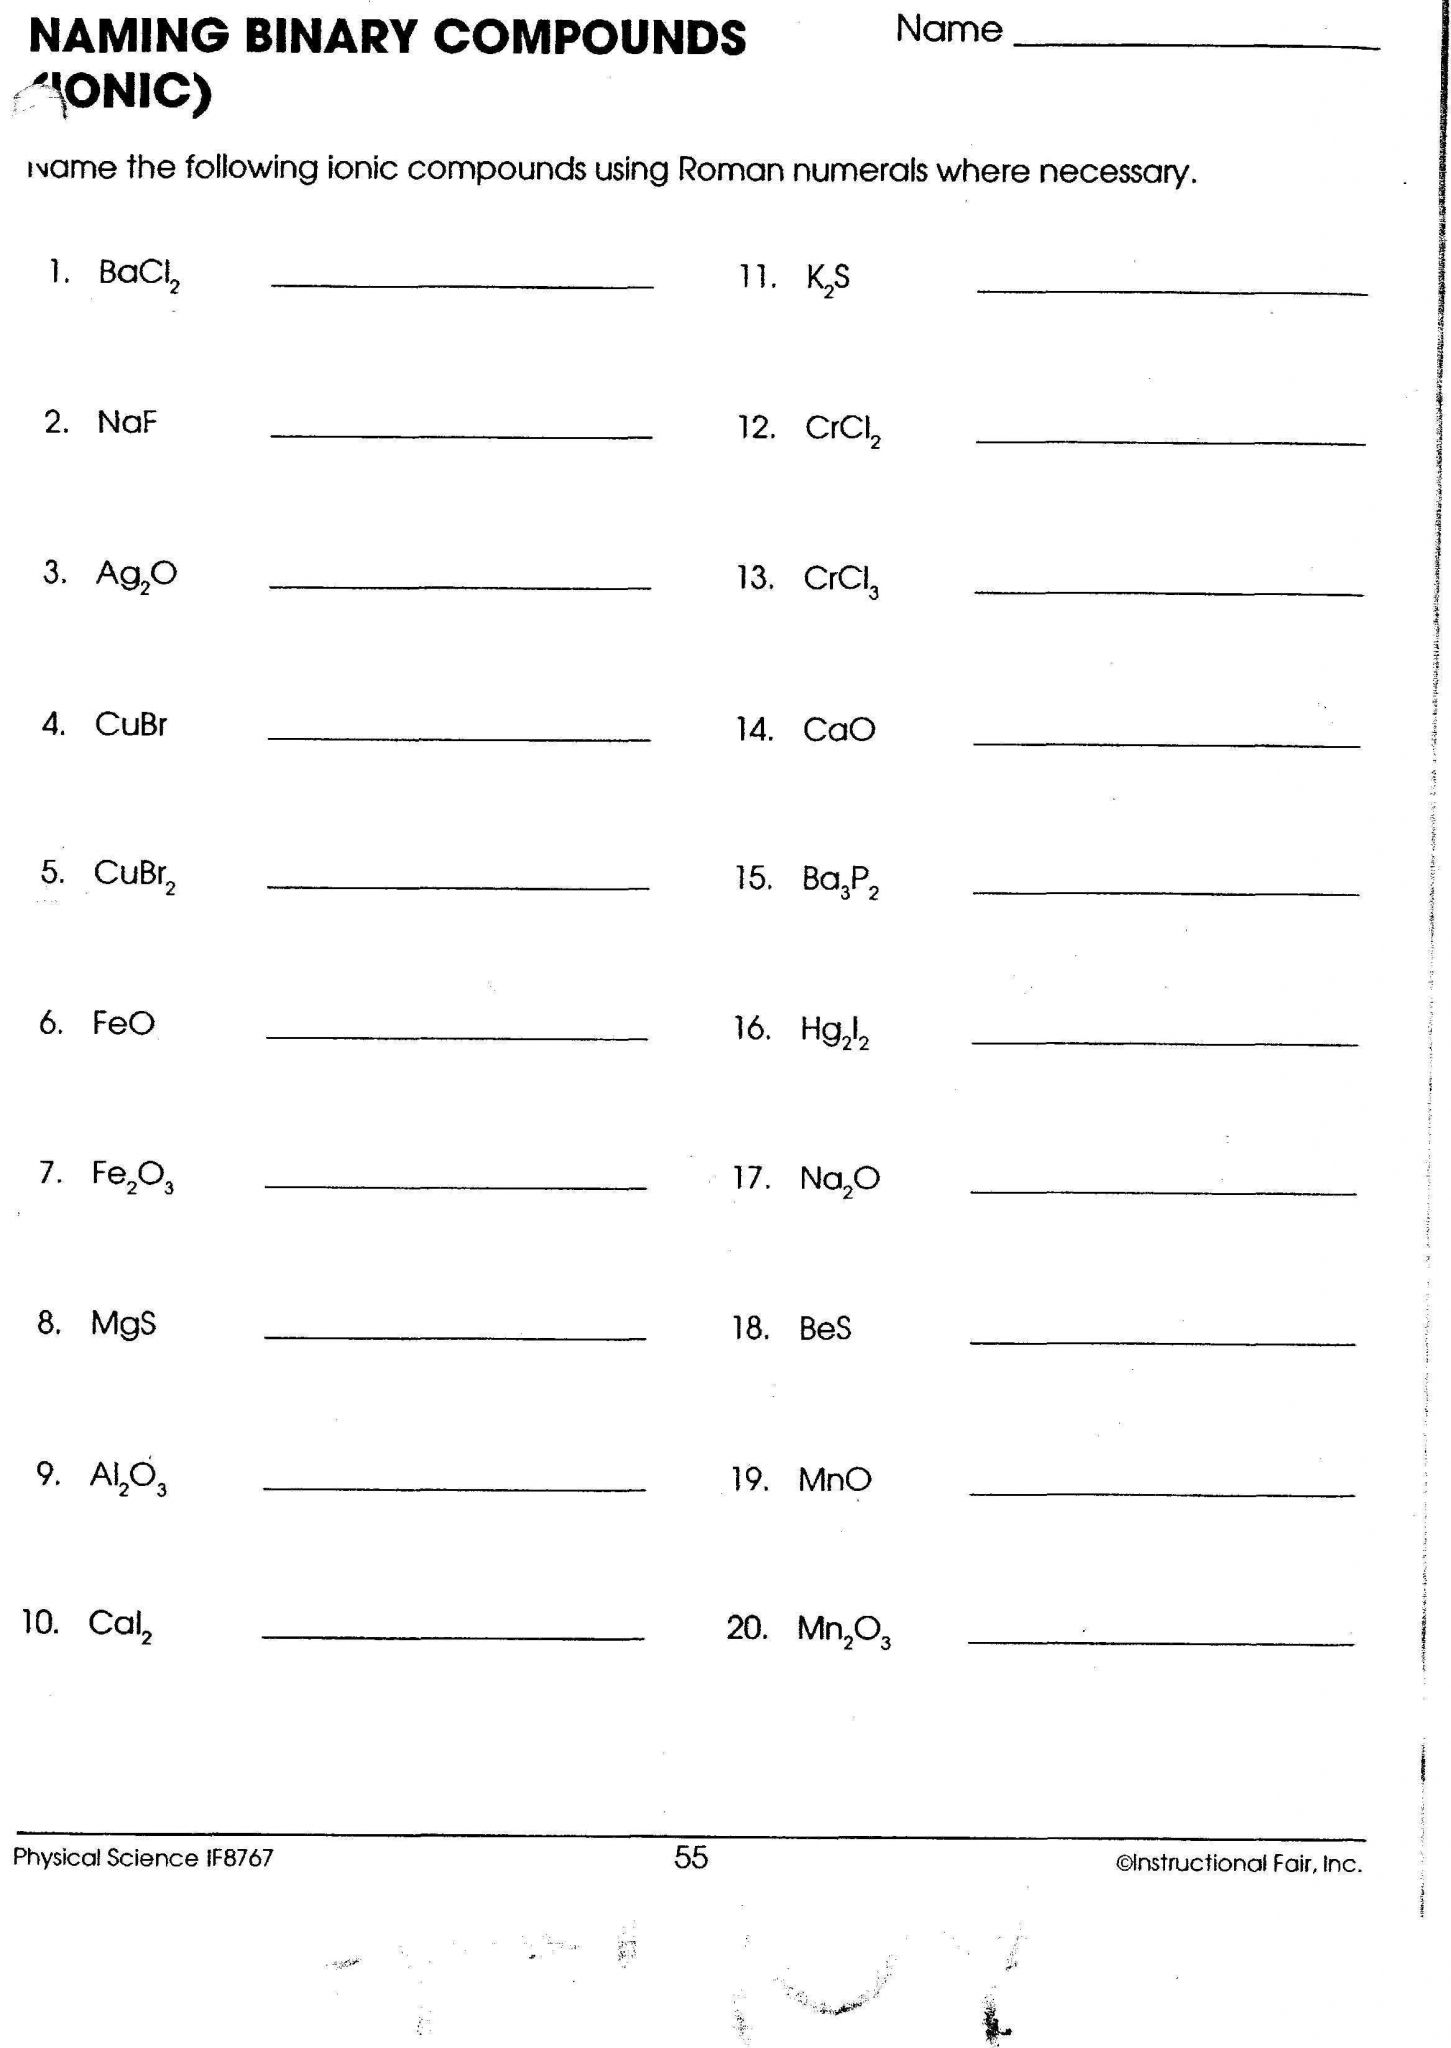 Polyatomic Ions Worksheet together with Simple Binary Ionic Pounds Worksheet Choice Image Worksheet